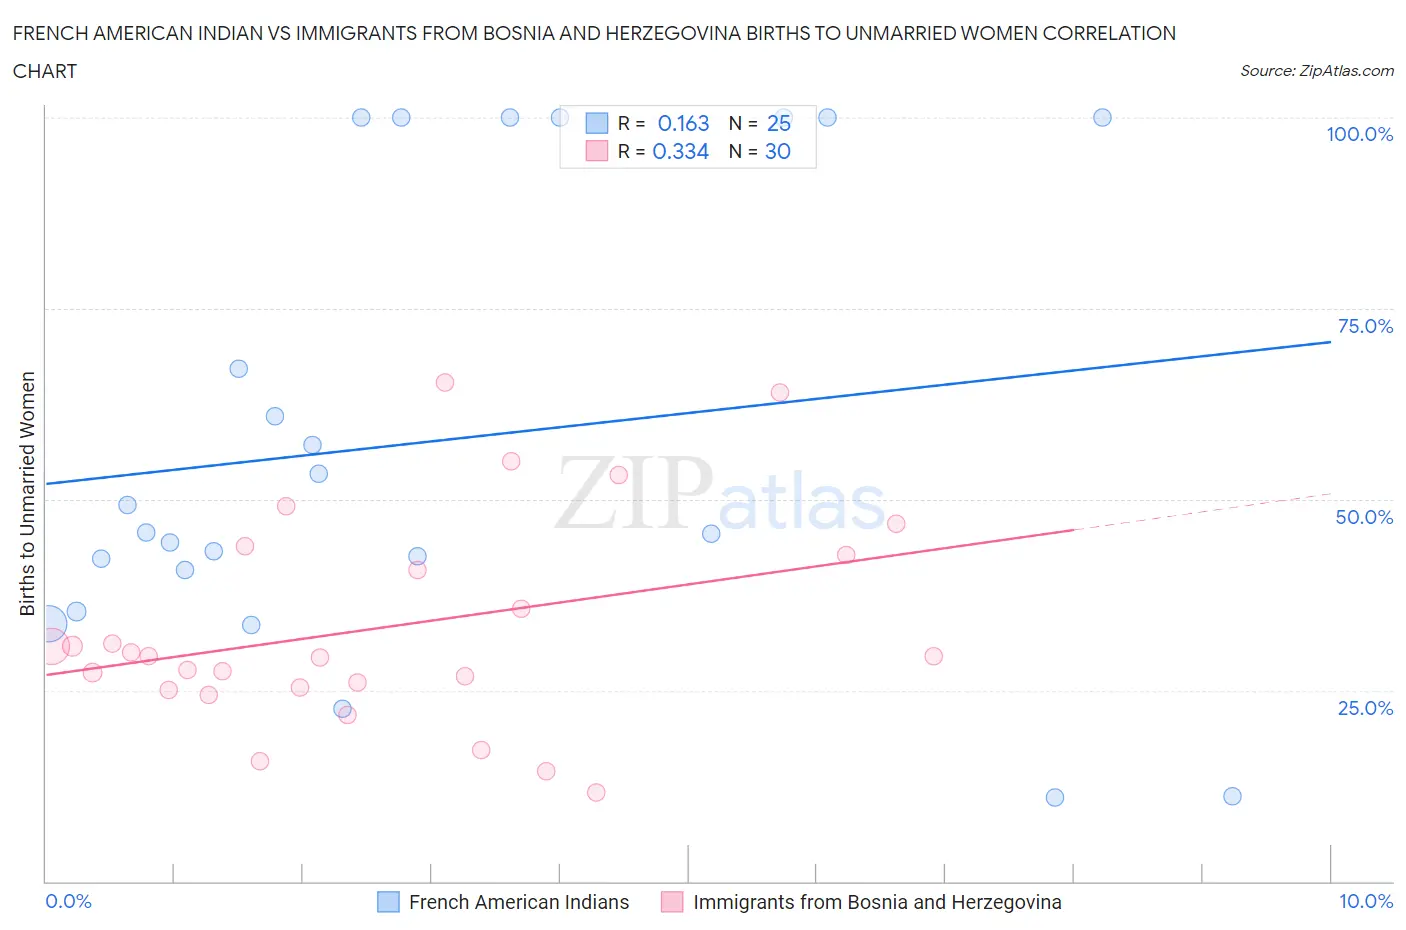 French American Indian vs Immigrants from Bosnia and Herzegovina Births to Unmarried Women